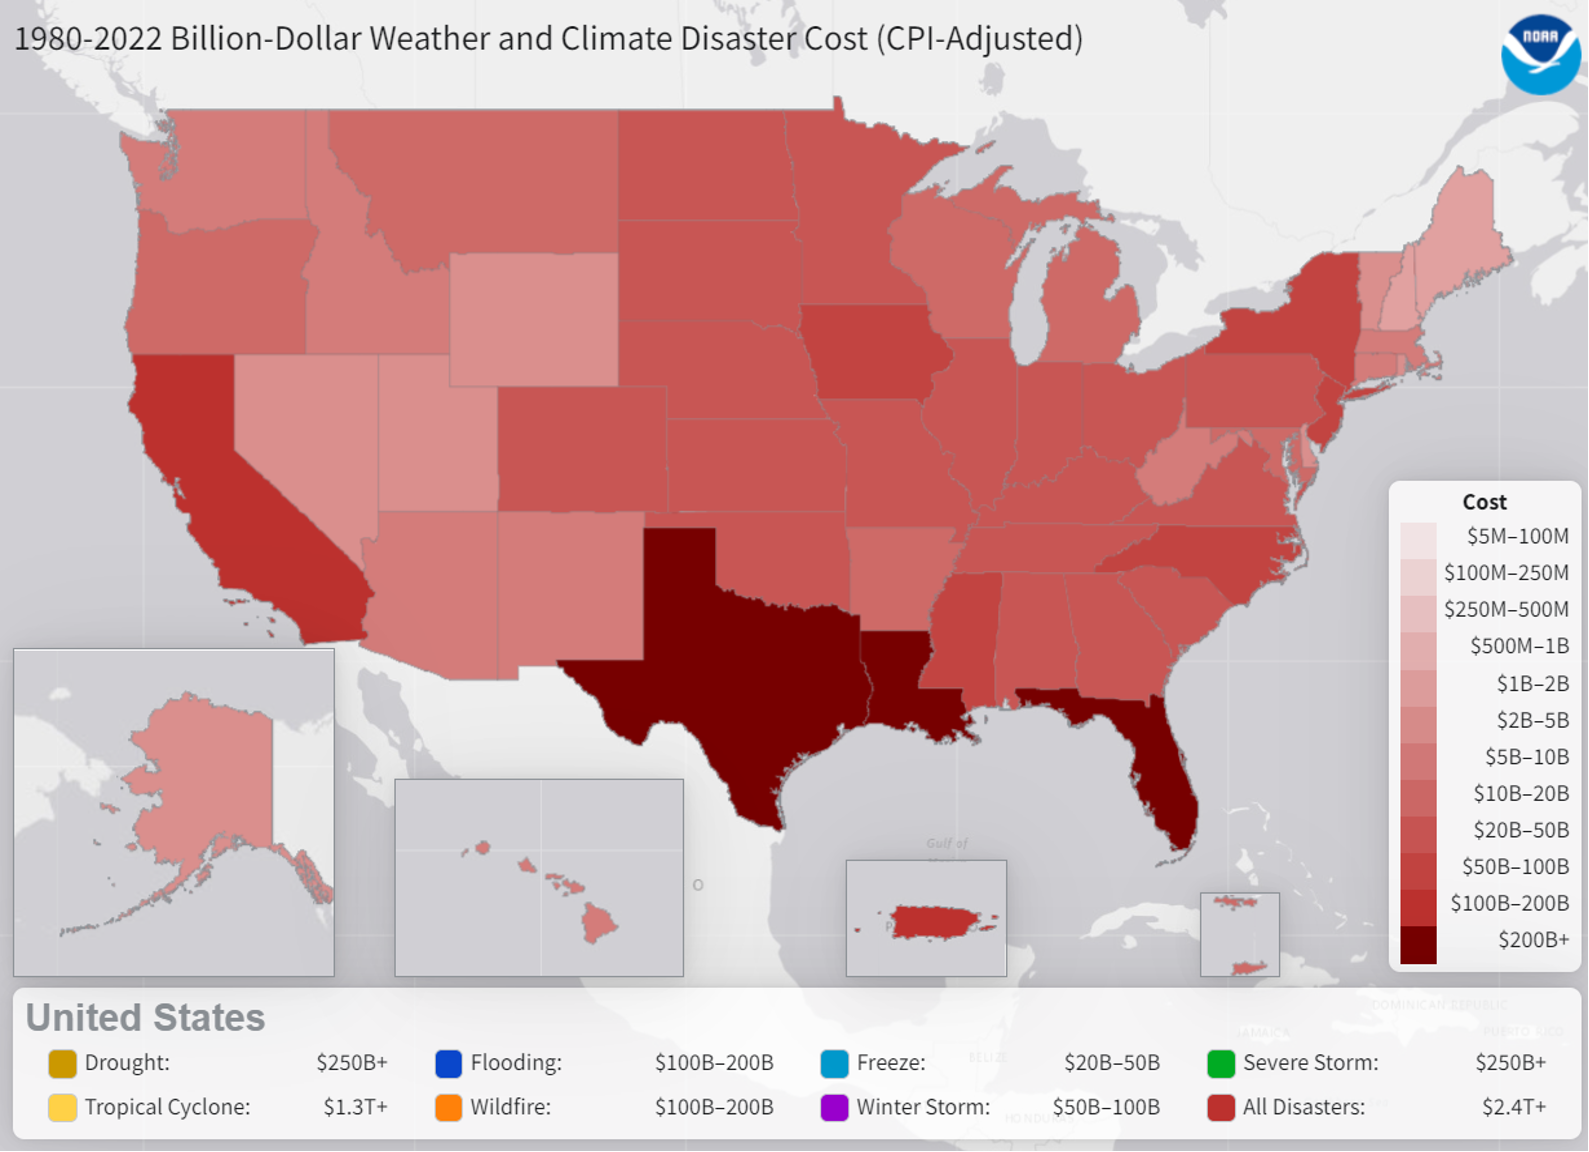 A United States map showing the estimated costs of weather and climate events in 2022. Source: NOAA.